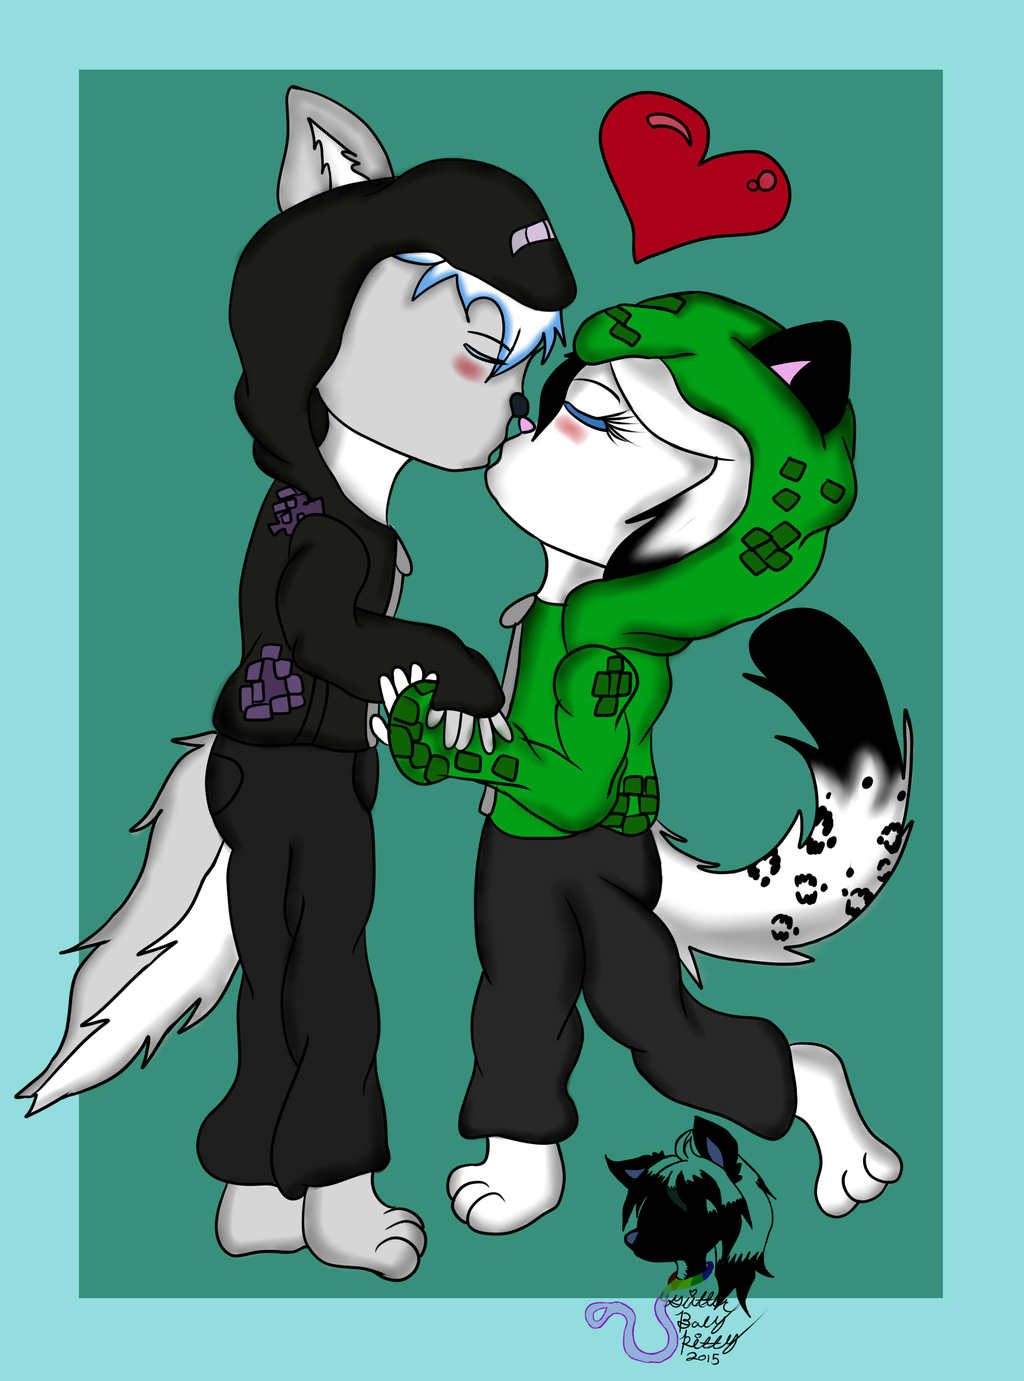 Most recent image: When a Glitter creeper meets an Axel Enderman <3